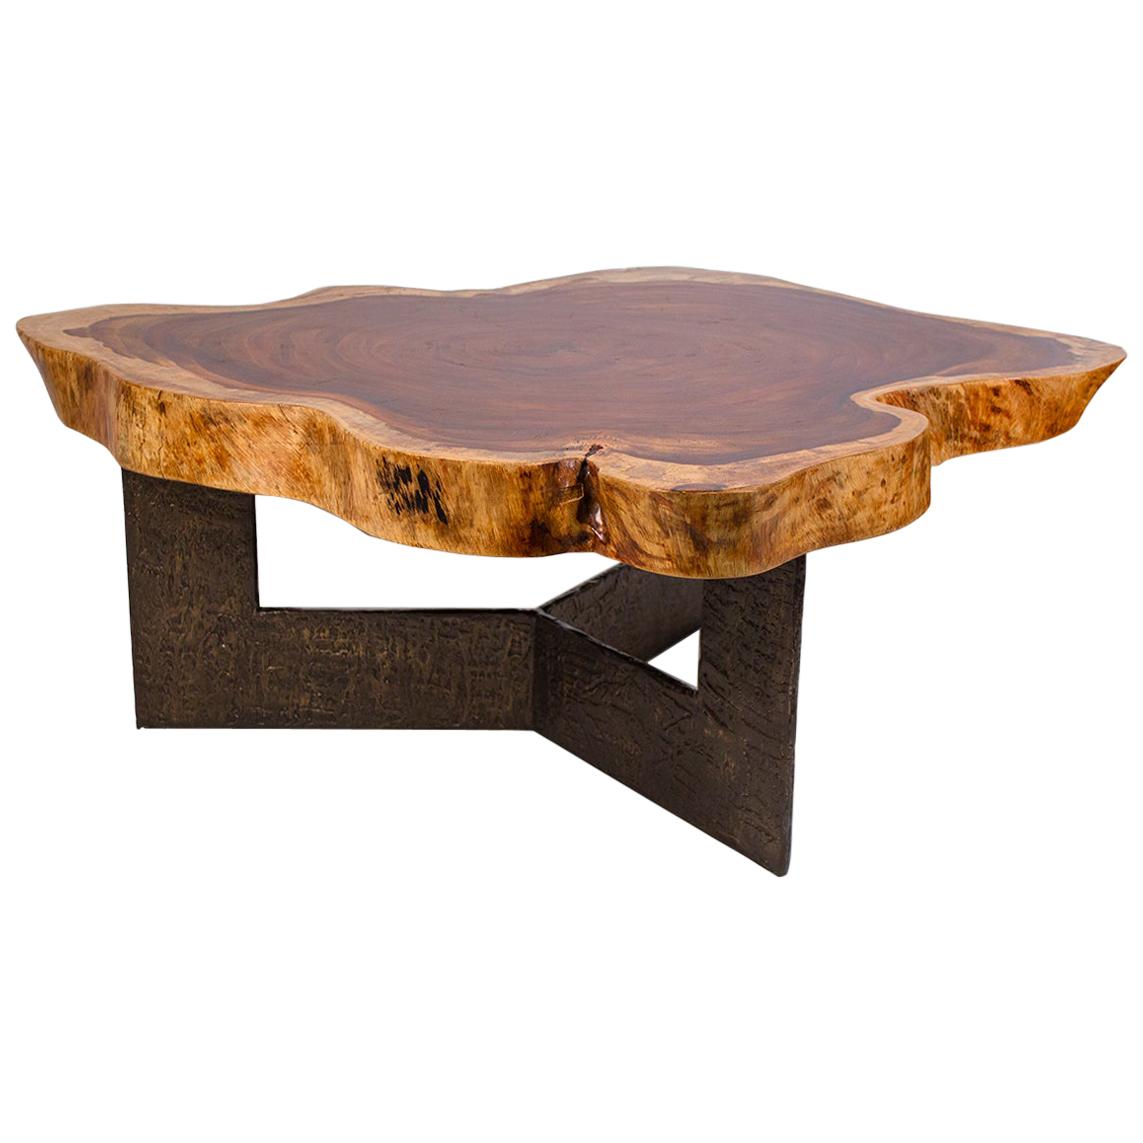 Live Edge Coffee Table in Parota Wood Tree Trunk with Brutalist Bronze Base